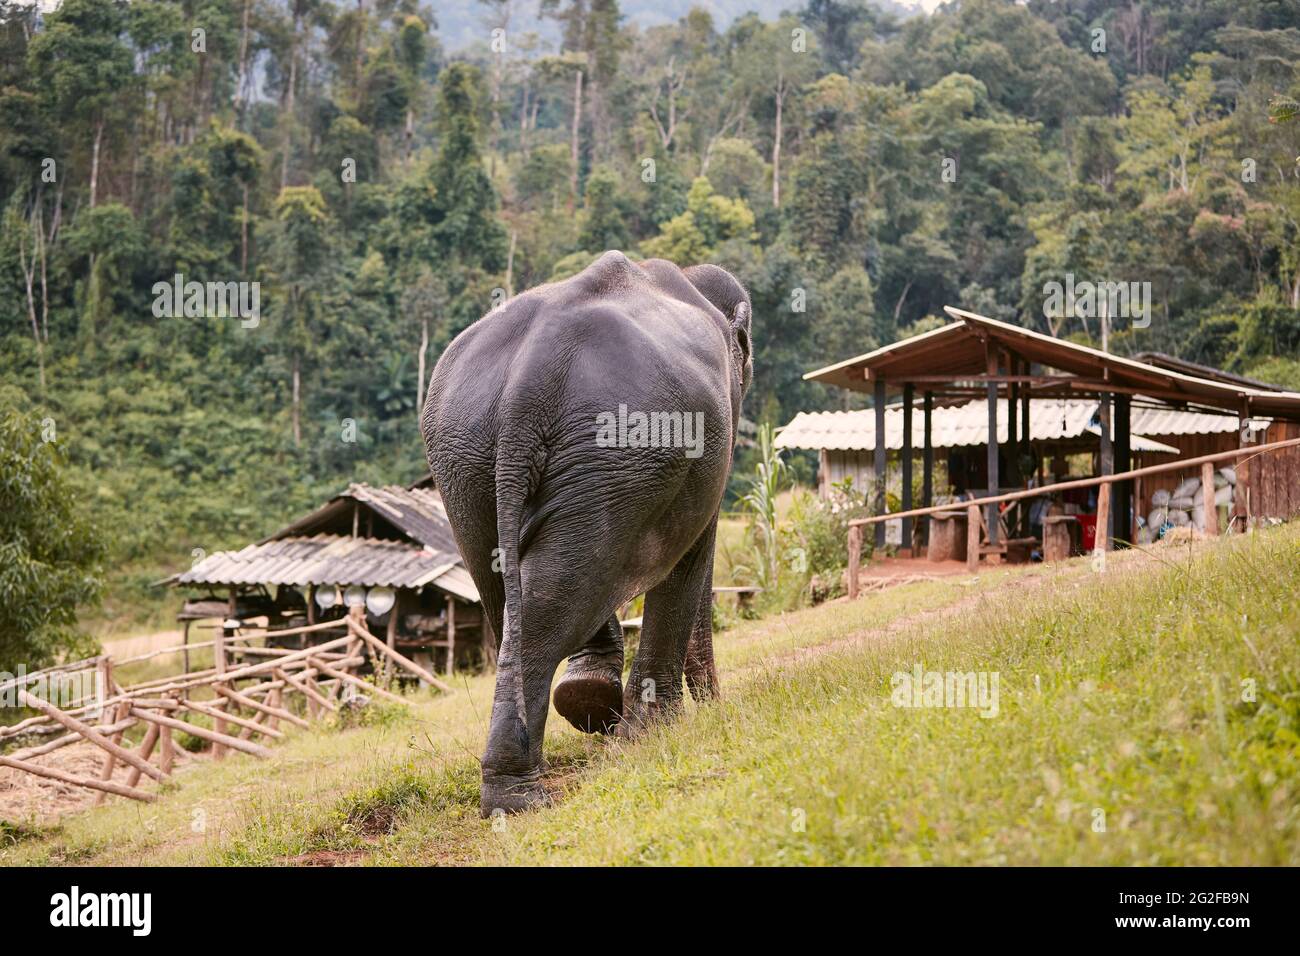 Large elephant walking on footpath to village against rainforest. Chiang Mai province, Thailand. Stock Photo